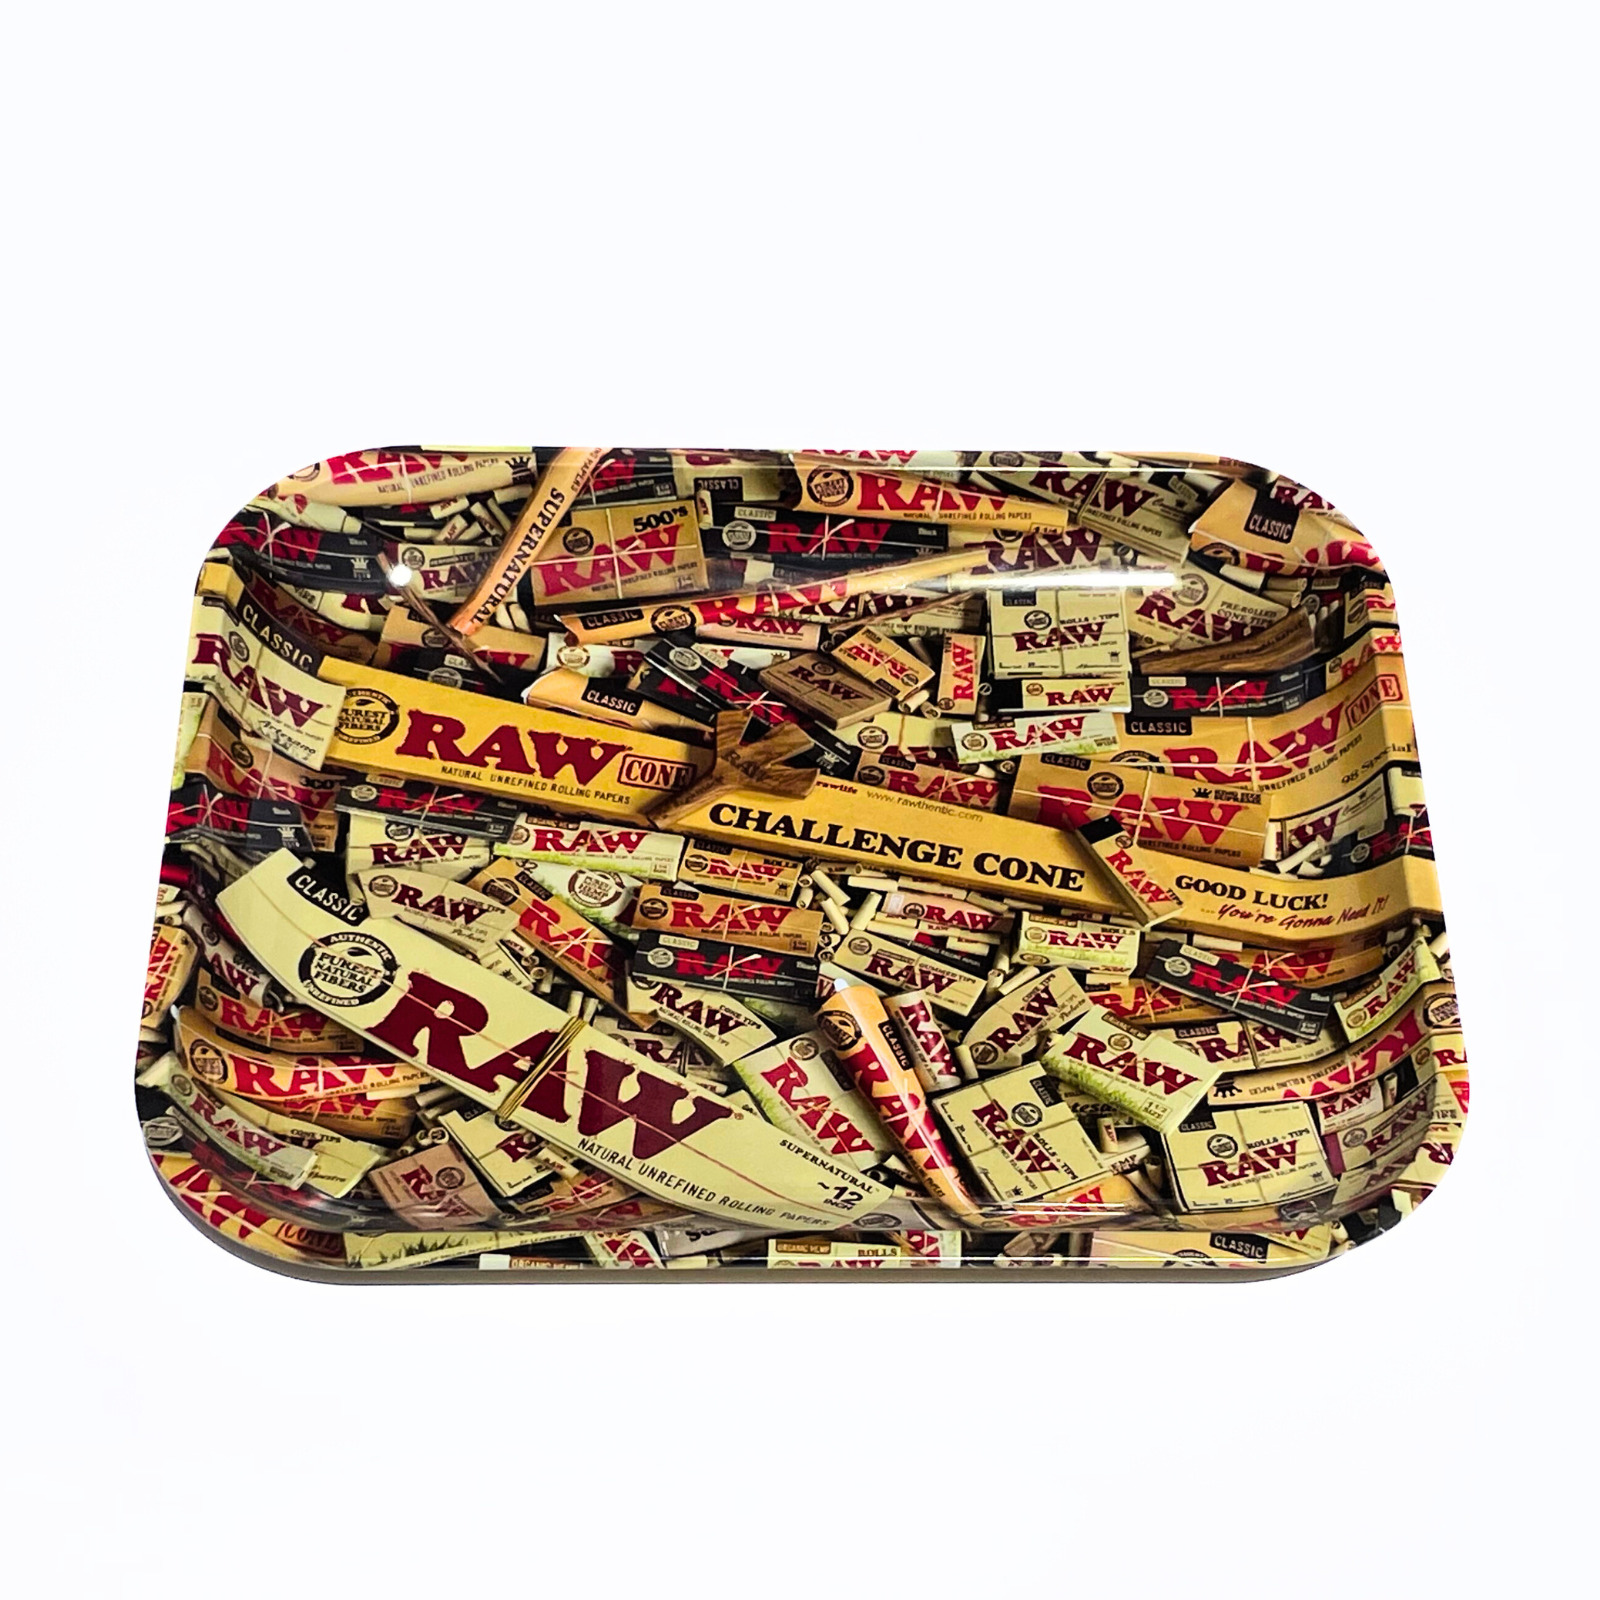 RARE LARGE RAW Rolling Papers Tray - Metal 11x14 (RAW Mixed items Theme)